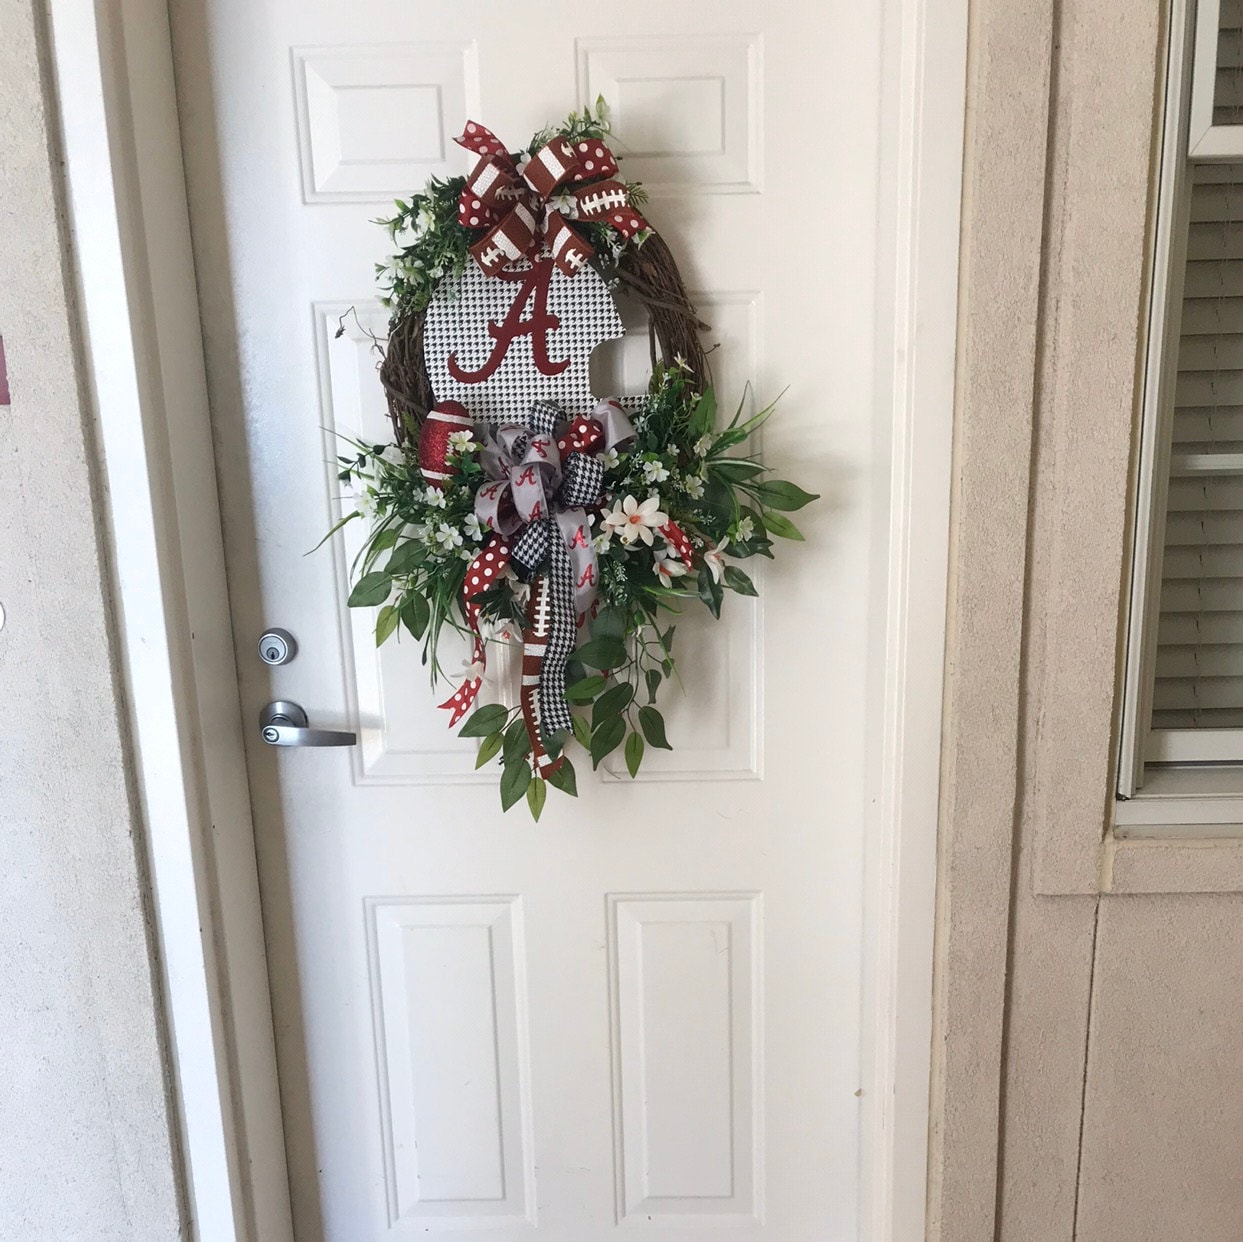 University Wreath, Football Wreath, College Football Wreath, Alabama How Much Does It Cost To Ship A Wreath